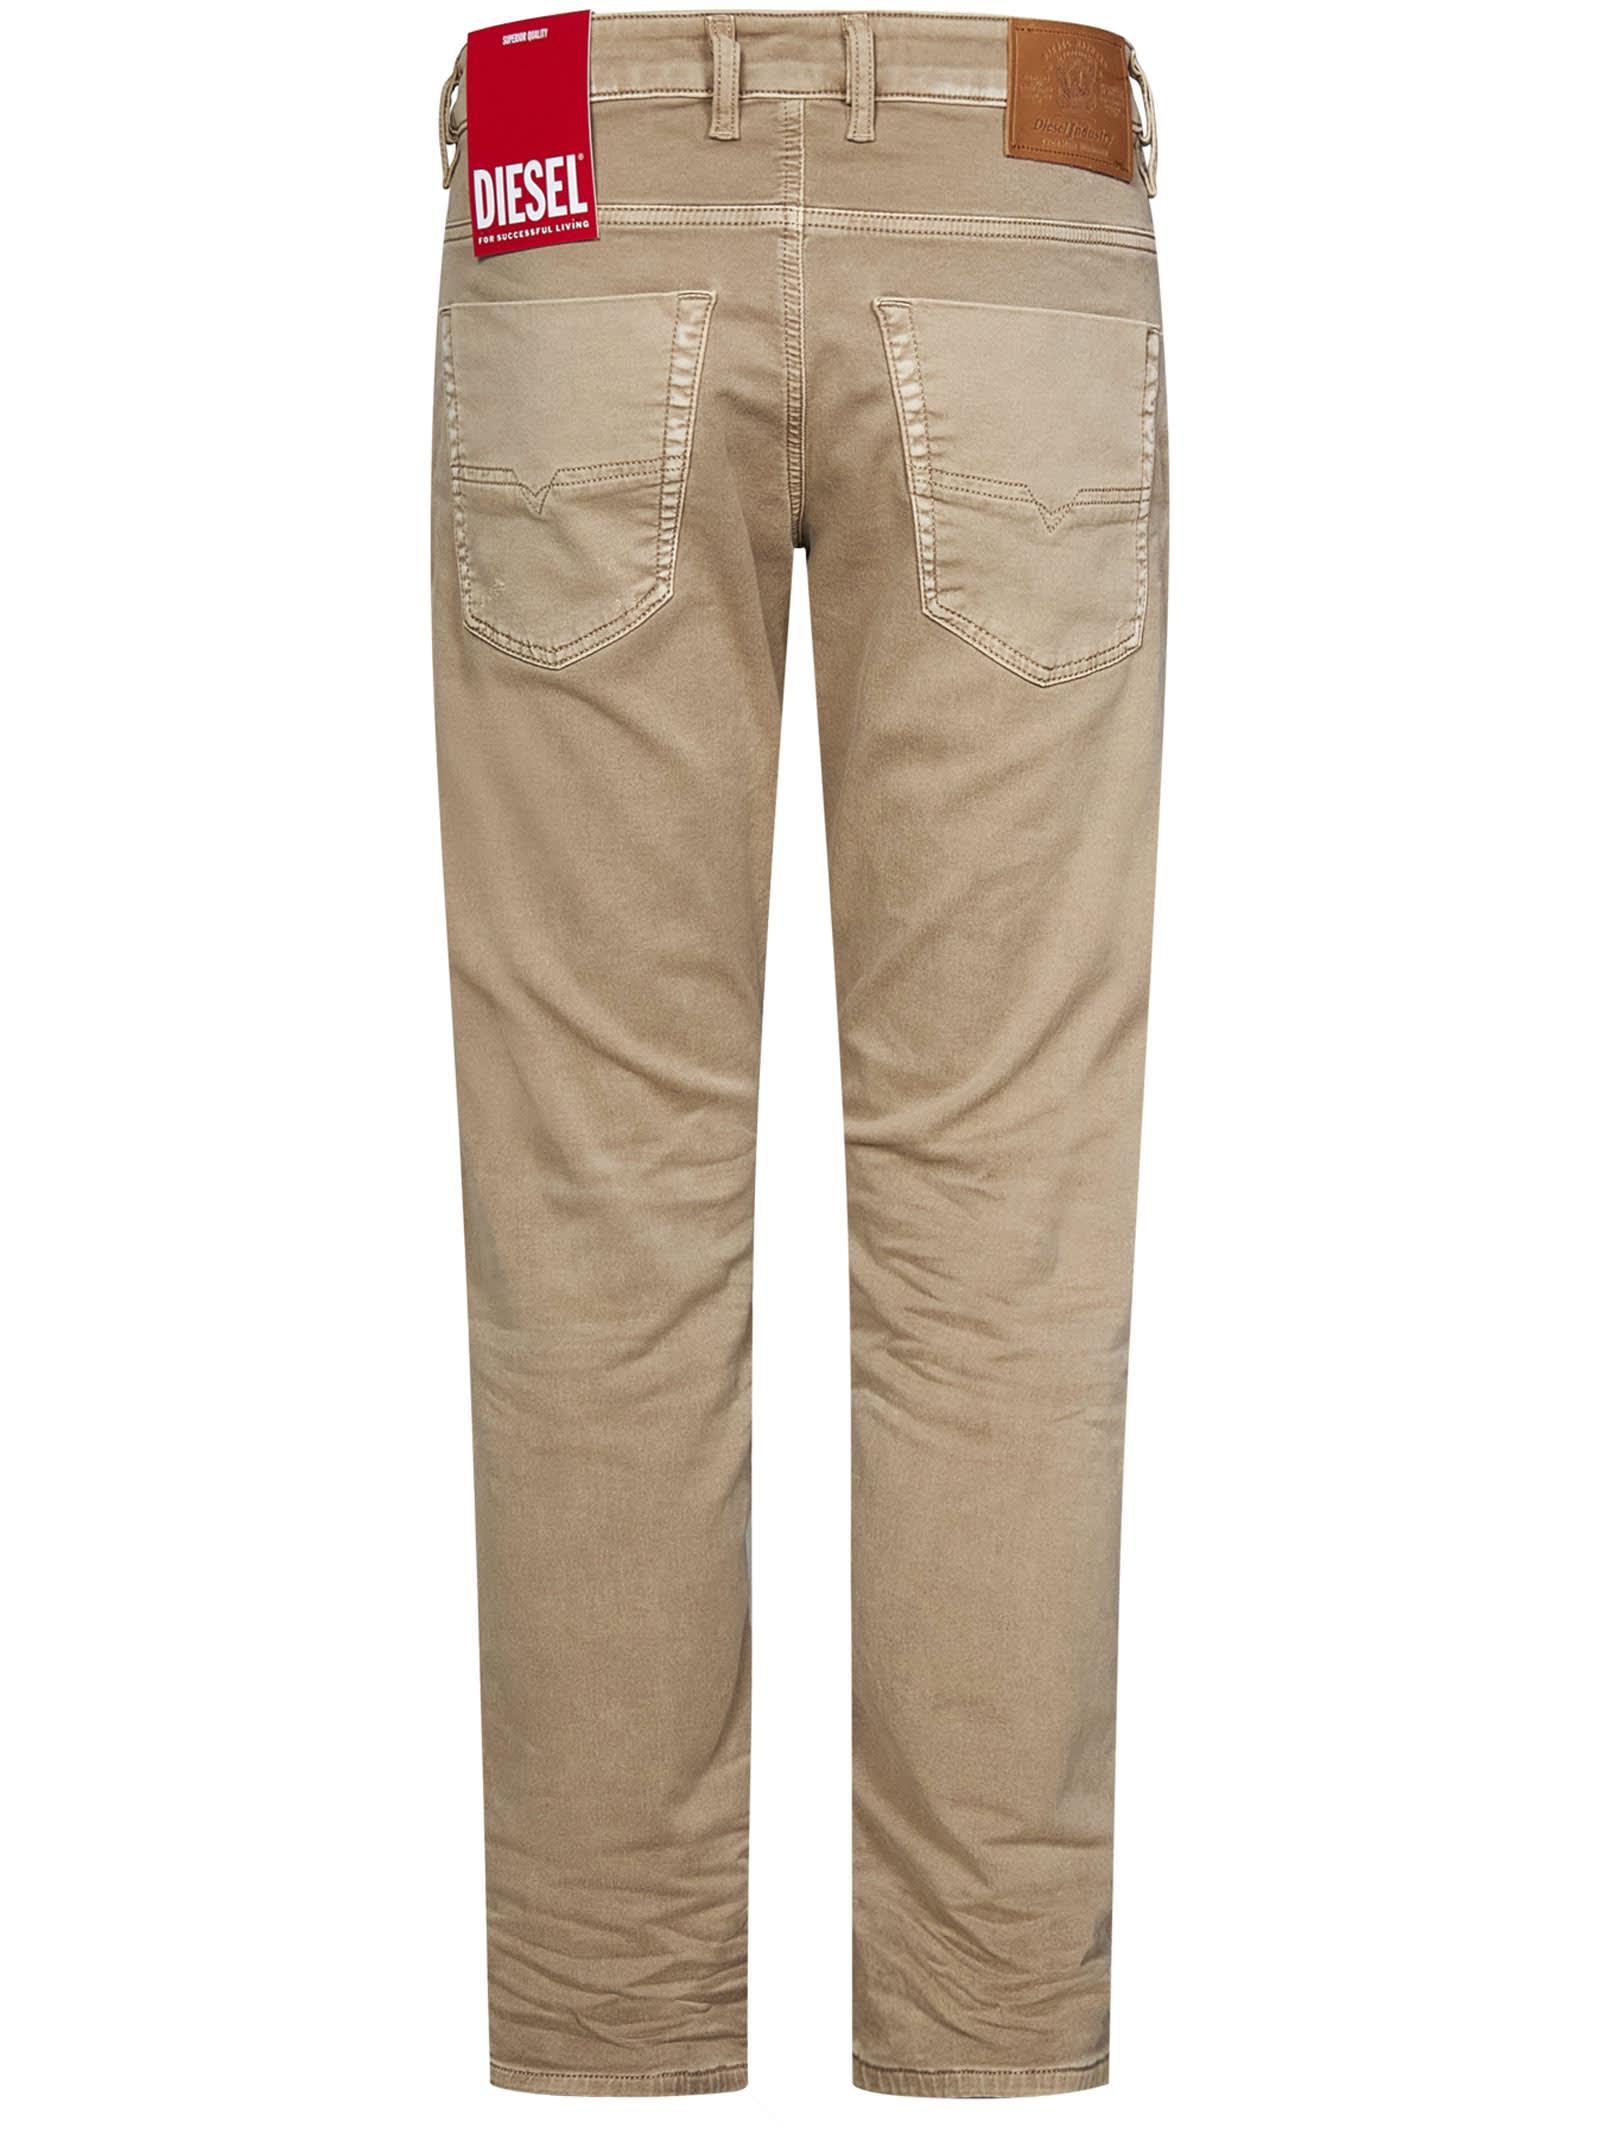 DIESEL Krooley joggjeans® 09e98 Tapered Jeans in Natural for Men | Lyst